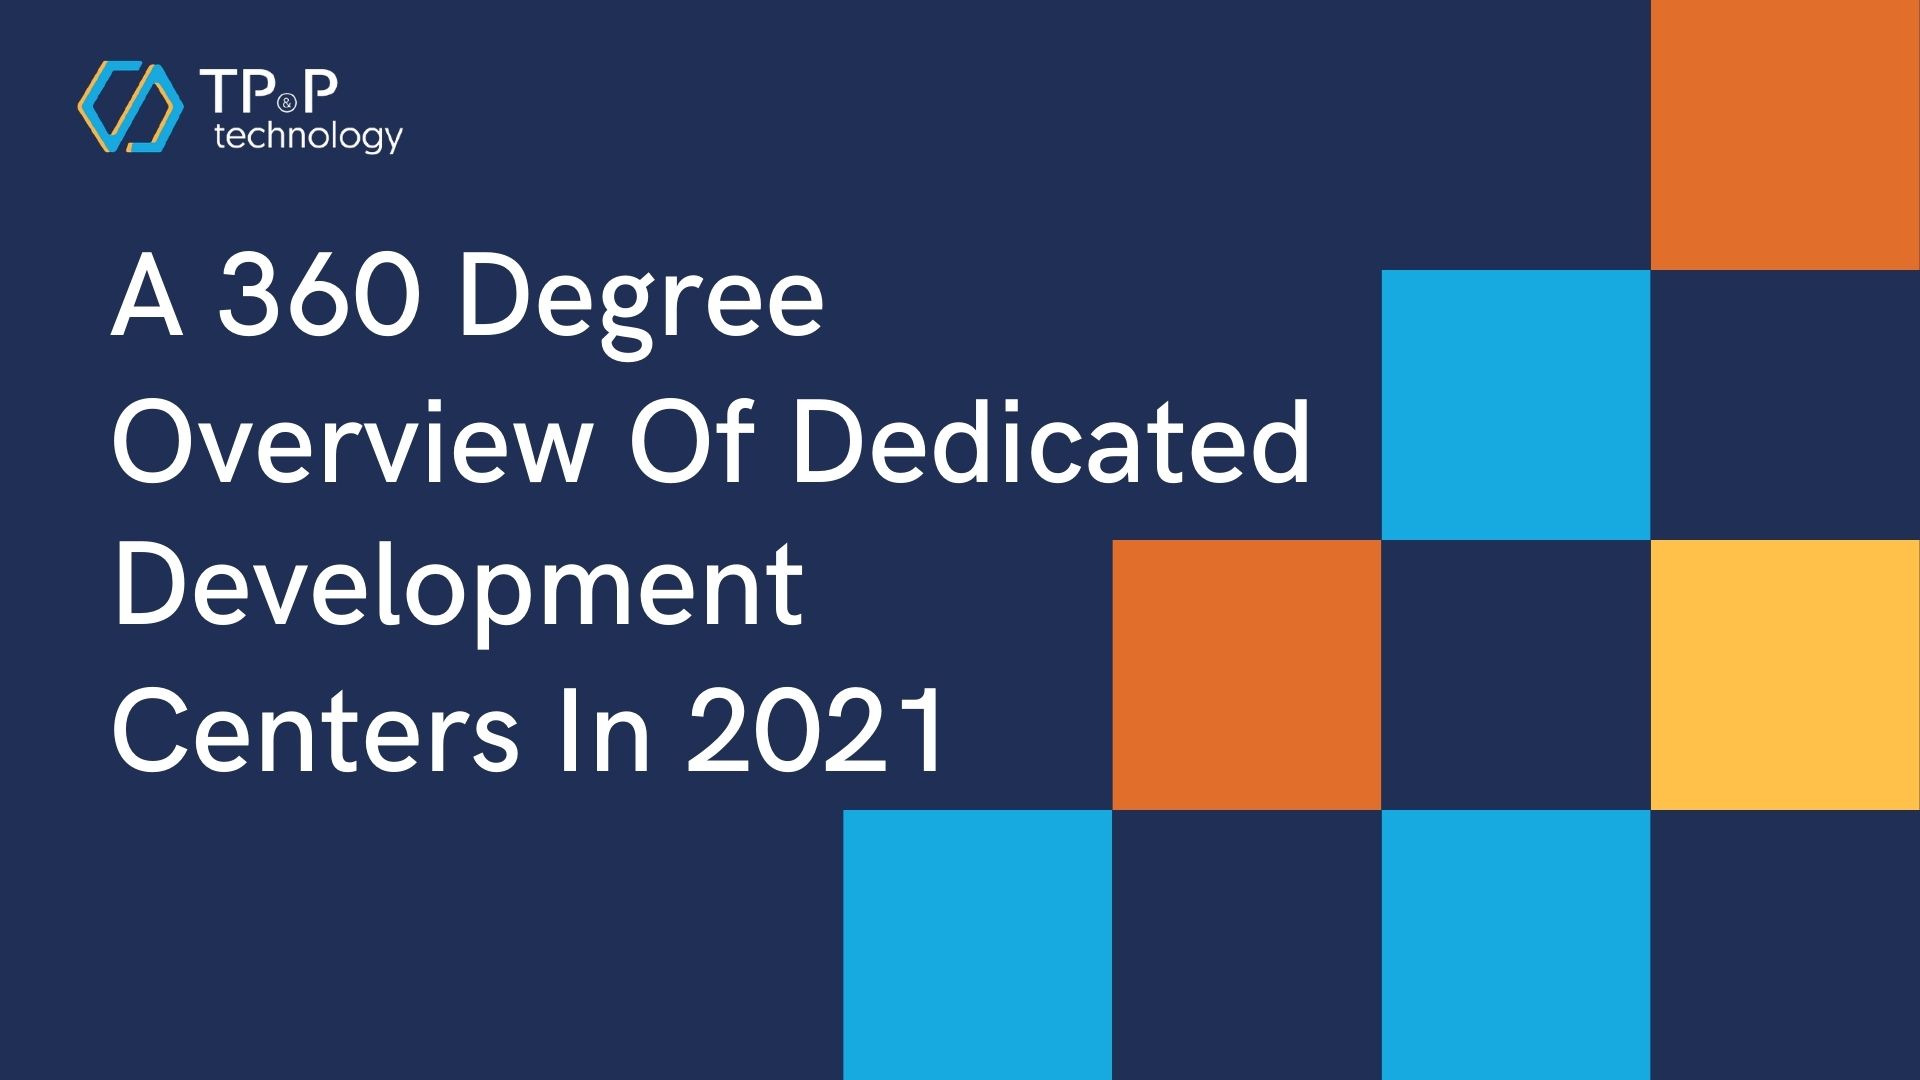 A 360 Degree Overview Of Dedicated Development Centers In 2021